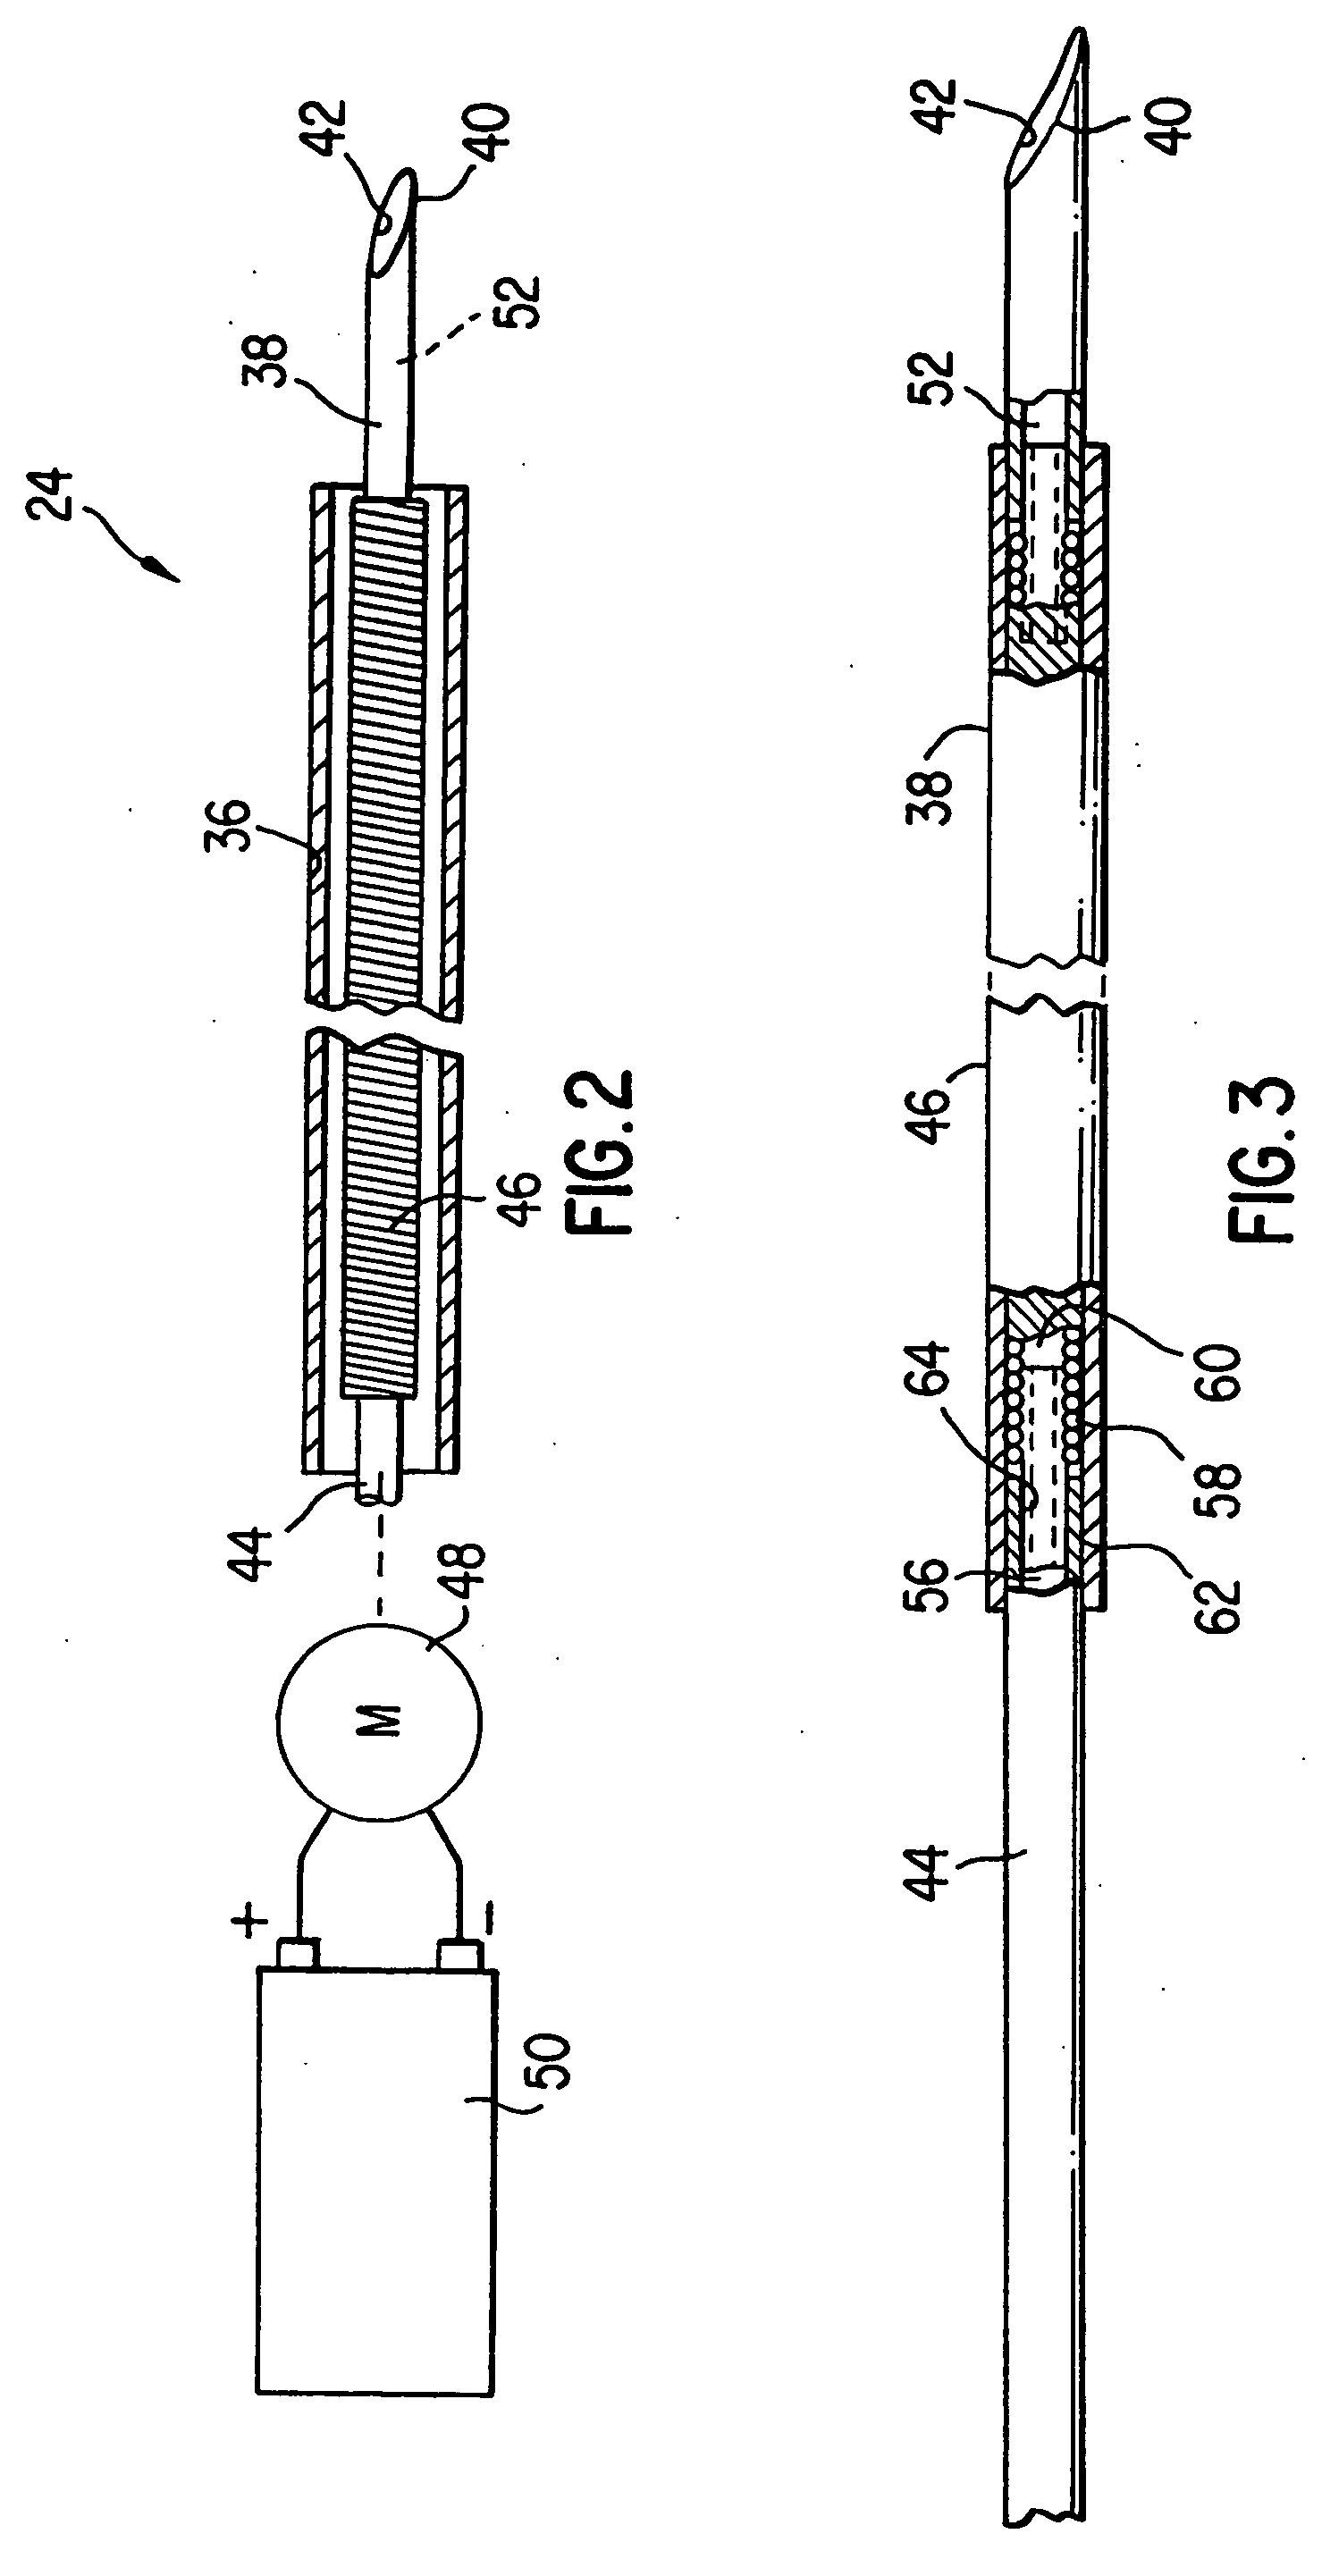 Catheter for the delivery of therapeutic agents to tissues